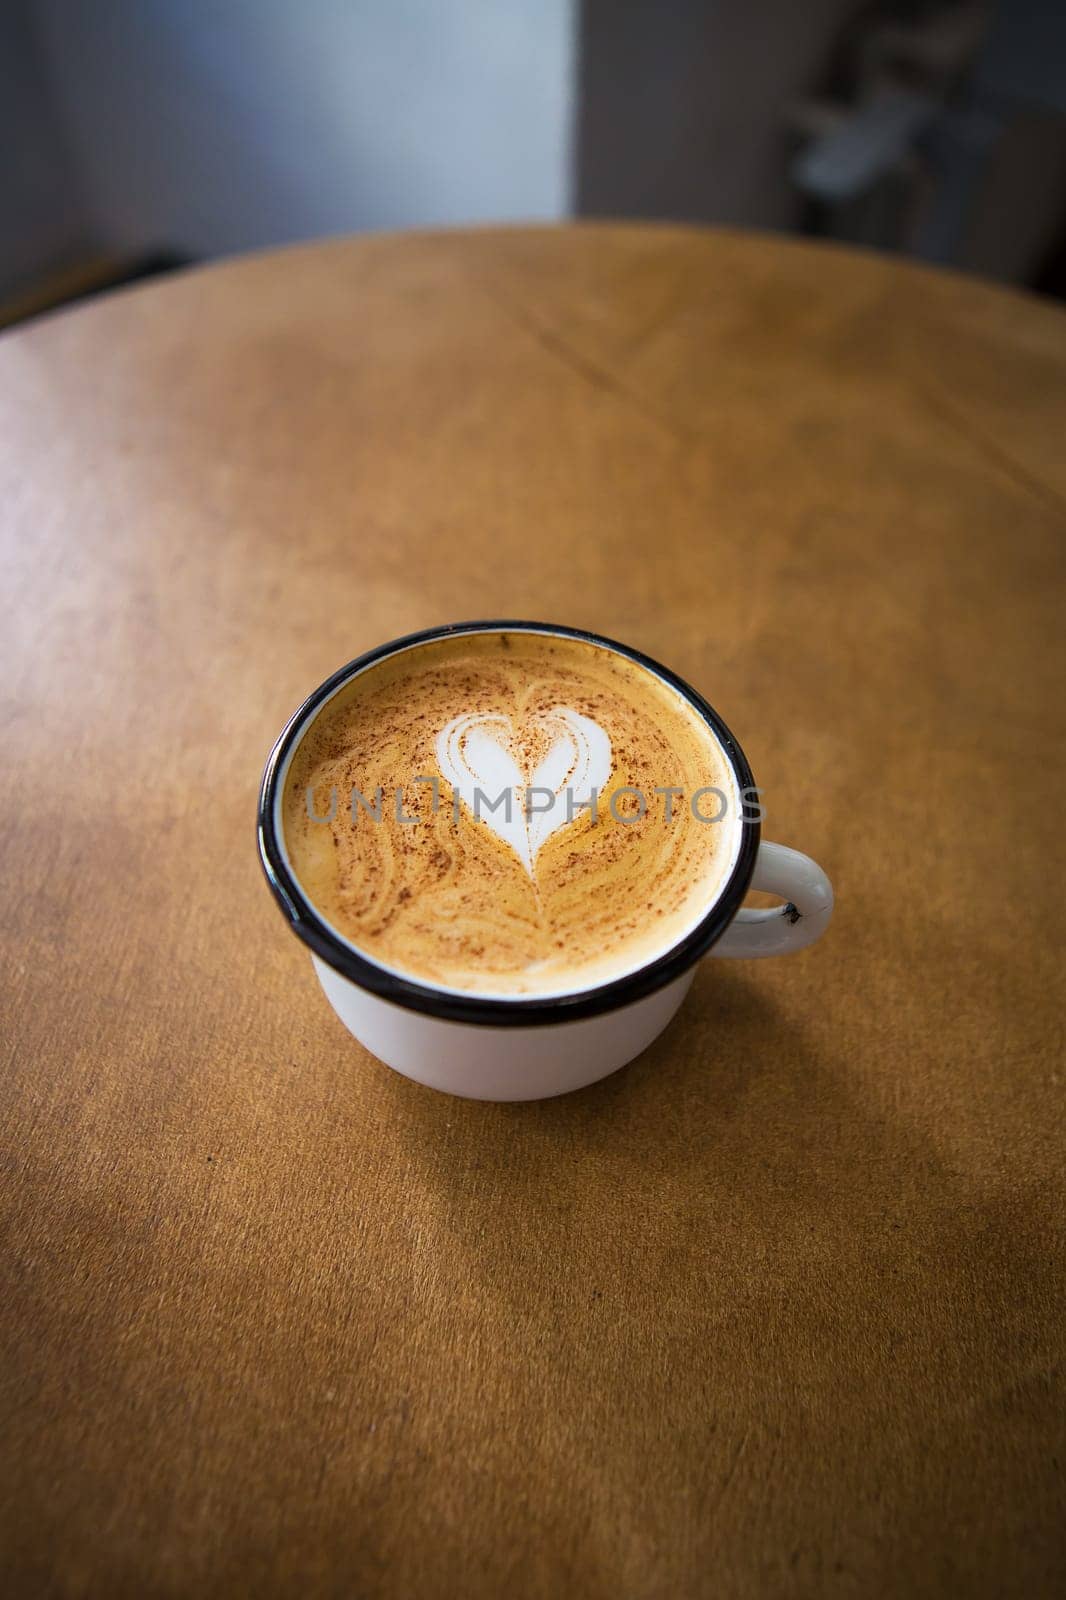 cup of cappuccino with a heart shaped pattern on a wooden table.